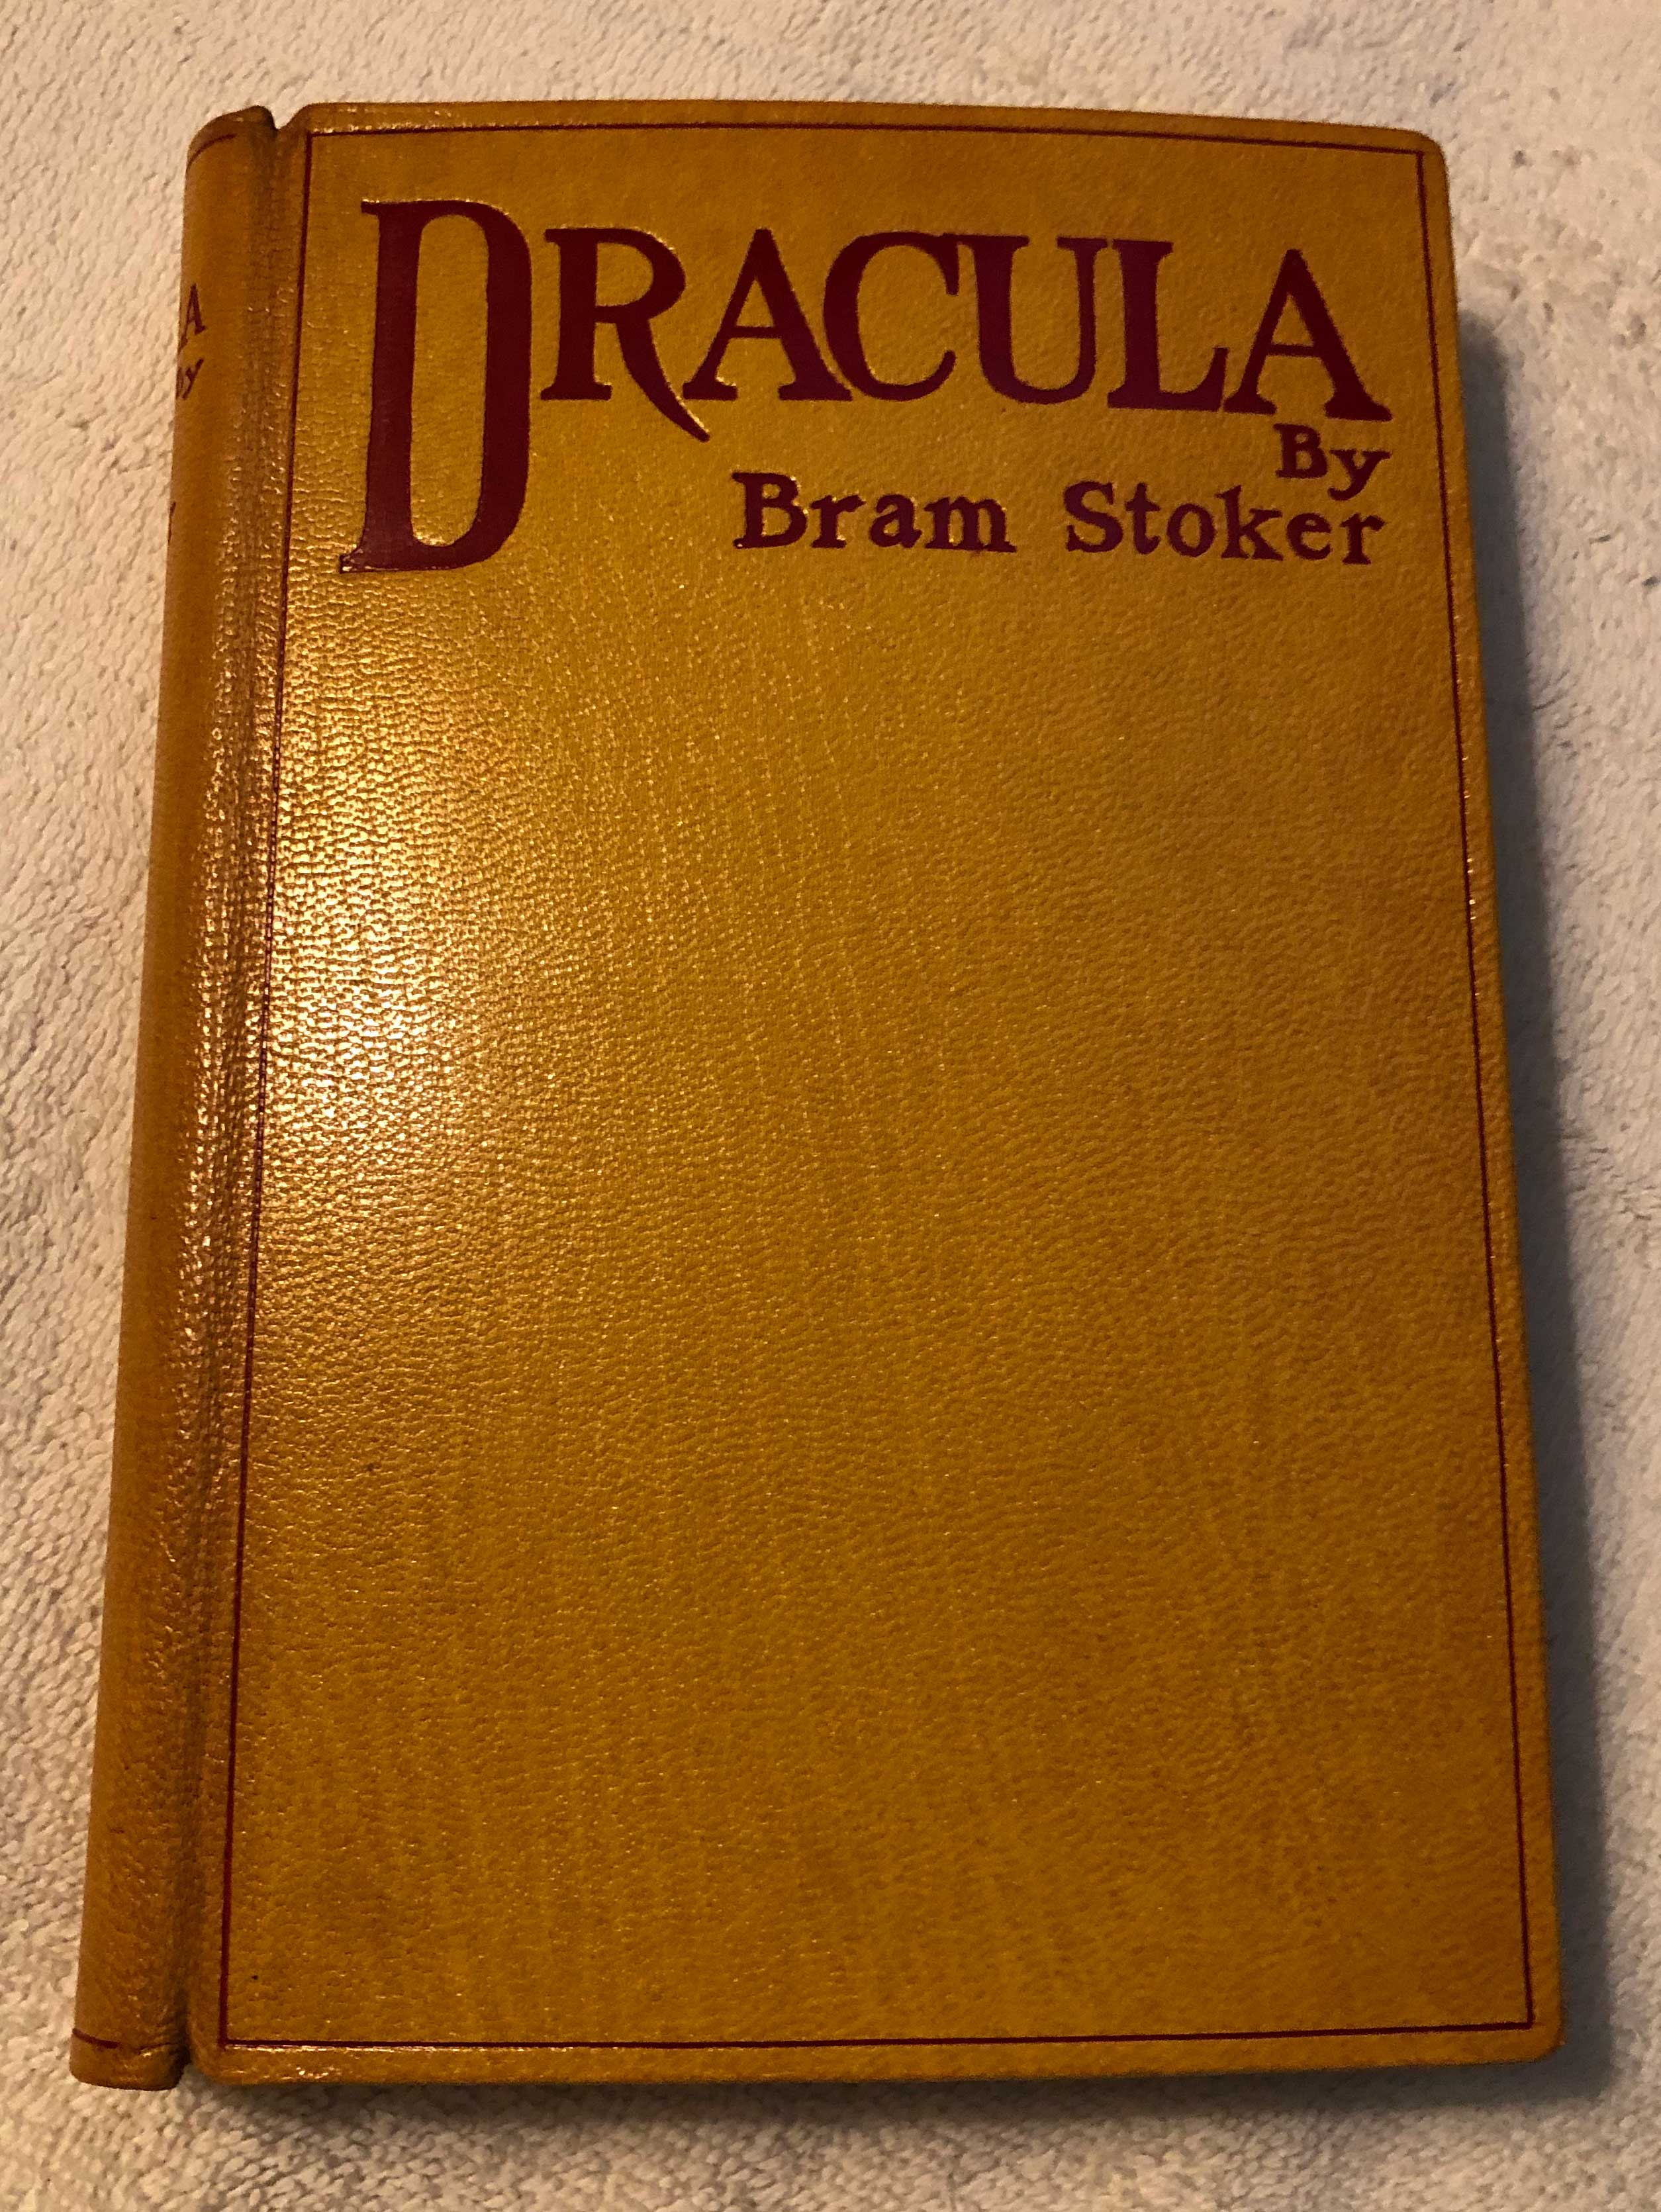 Dracula book published in 1897